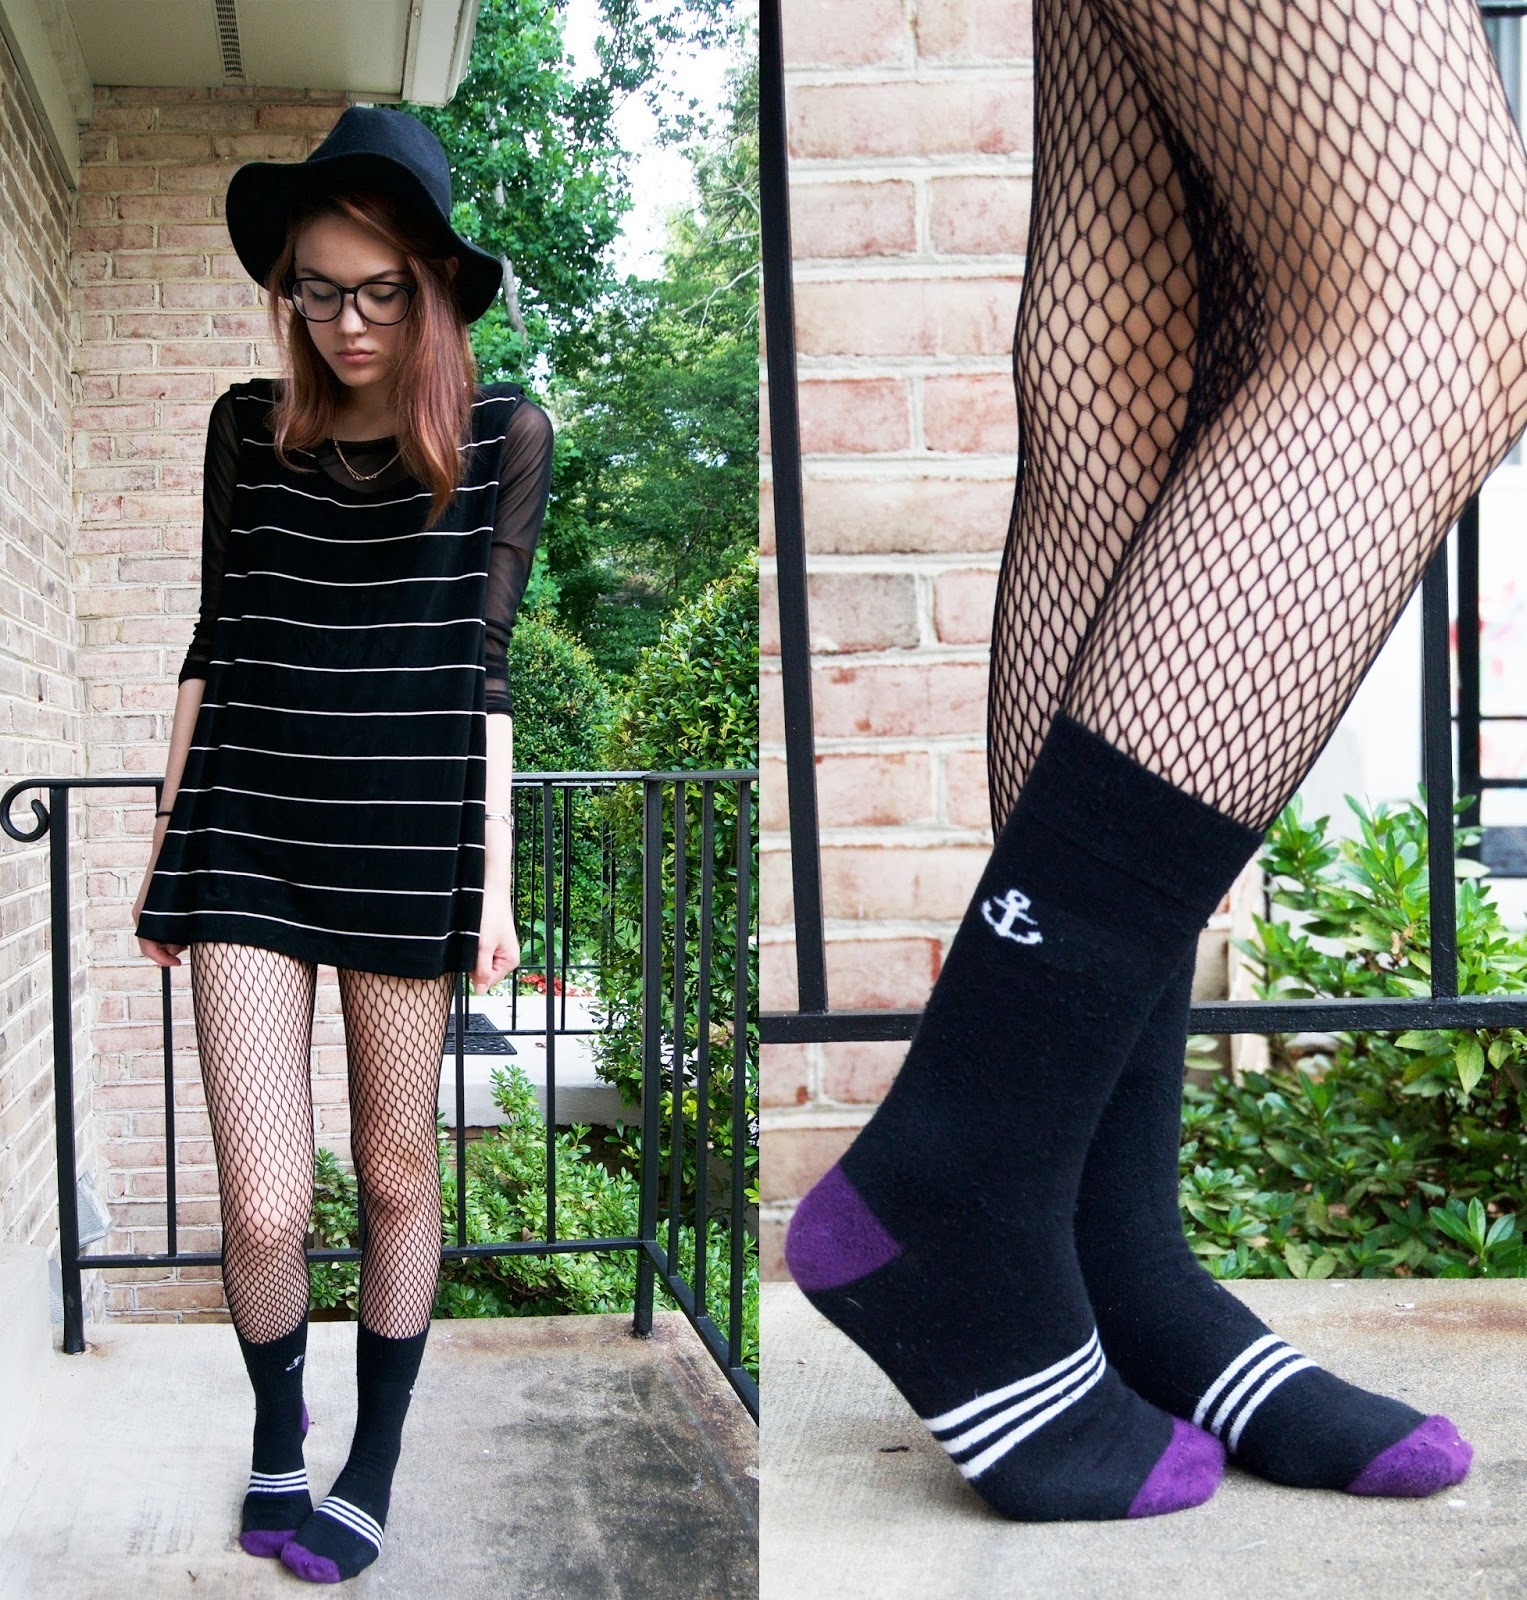 Black Tights with Mesh Long Sleeve T-shirt Outfits (3 ideas & outfits)